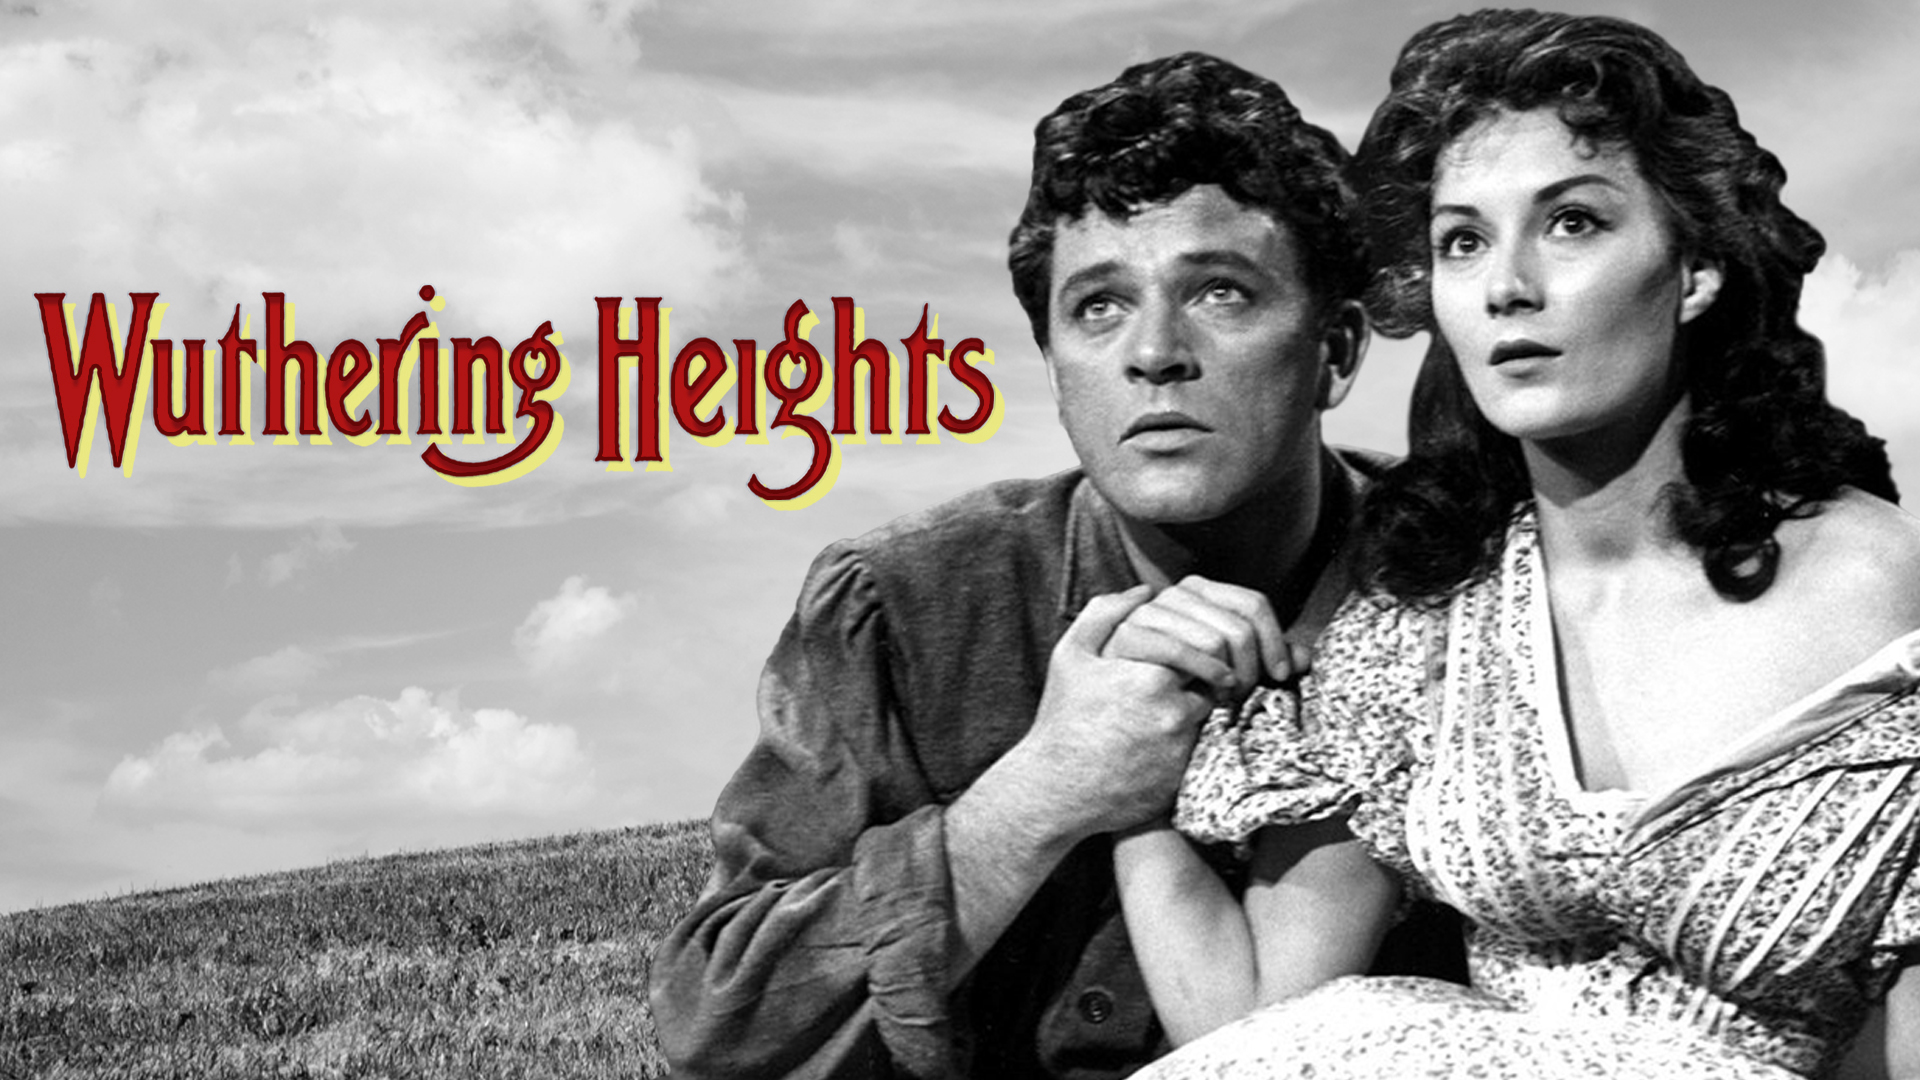 Wuthering Heights - Wuthering Heights (1939)